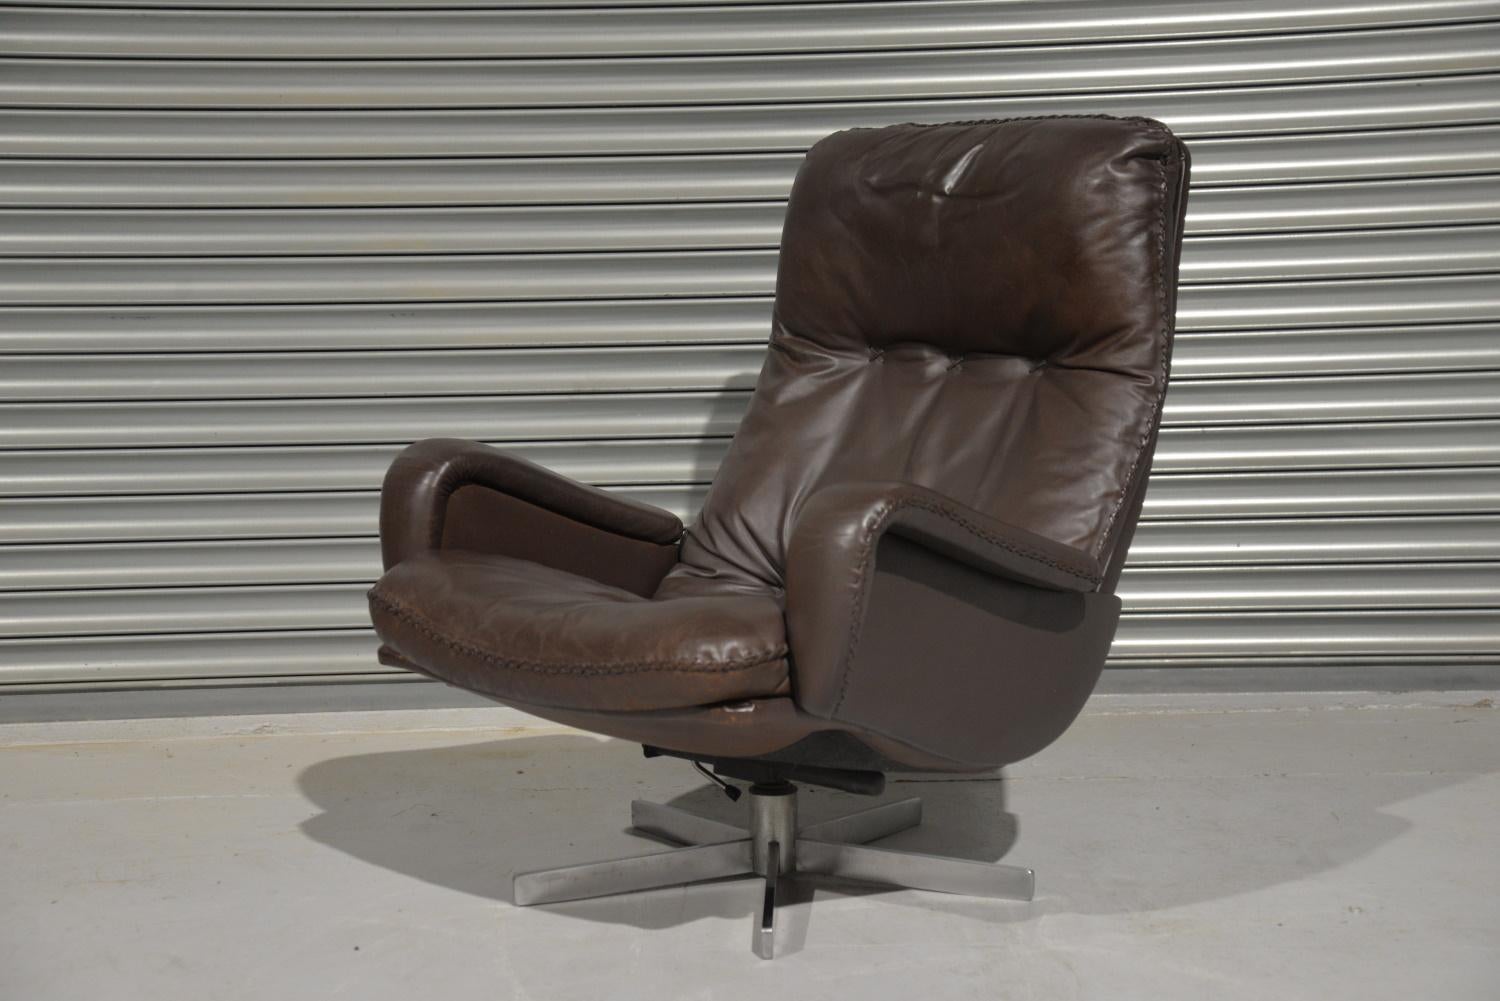 We are delighted to bring to you an ultra rare and highly desirable De Sede S 231 vintage lounge swivel armchair. Built in the late 1960s by De Sede craftsman from Switzerland this same chair was used as a prop in the 1969 James Bond film On Her